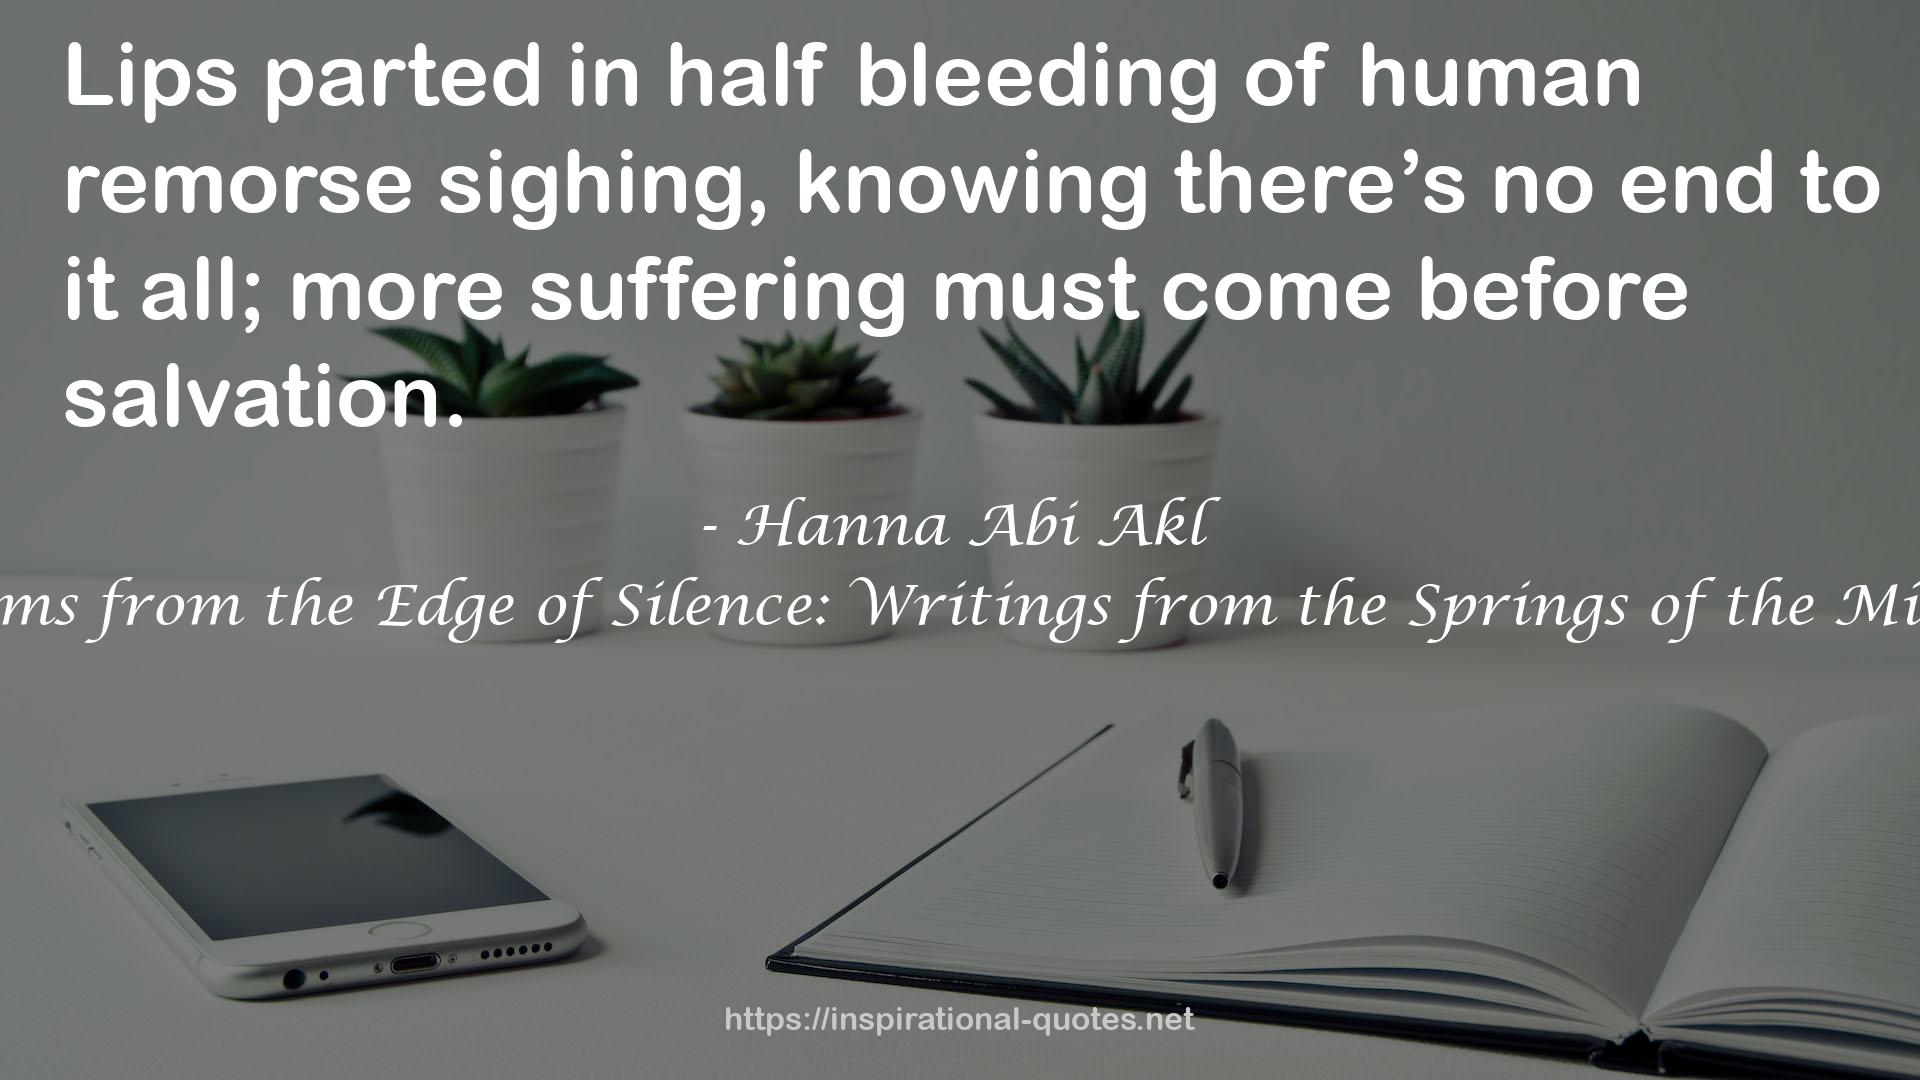 Stems from the Edge of Silence: Writings from the Springs of the Mind QUOTES